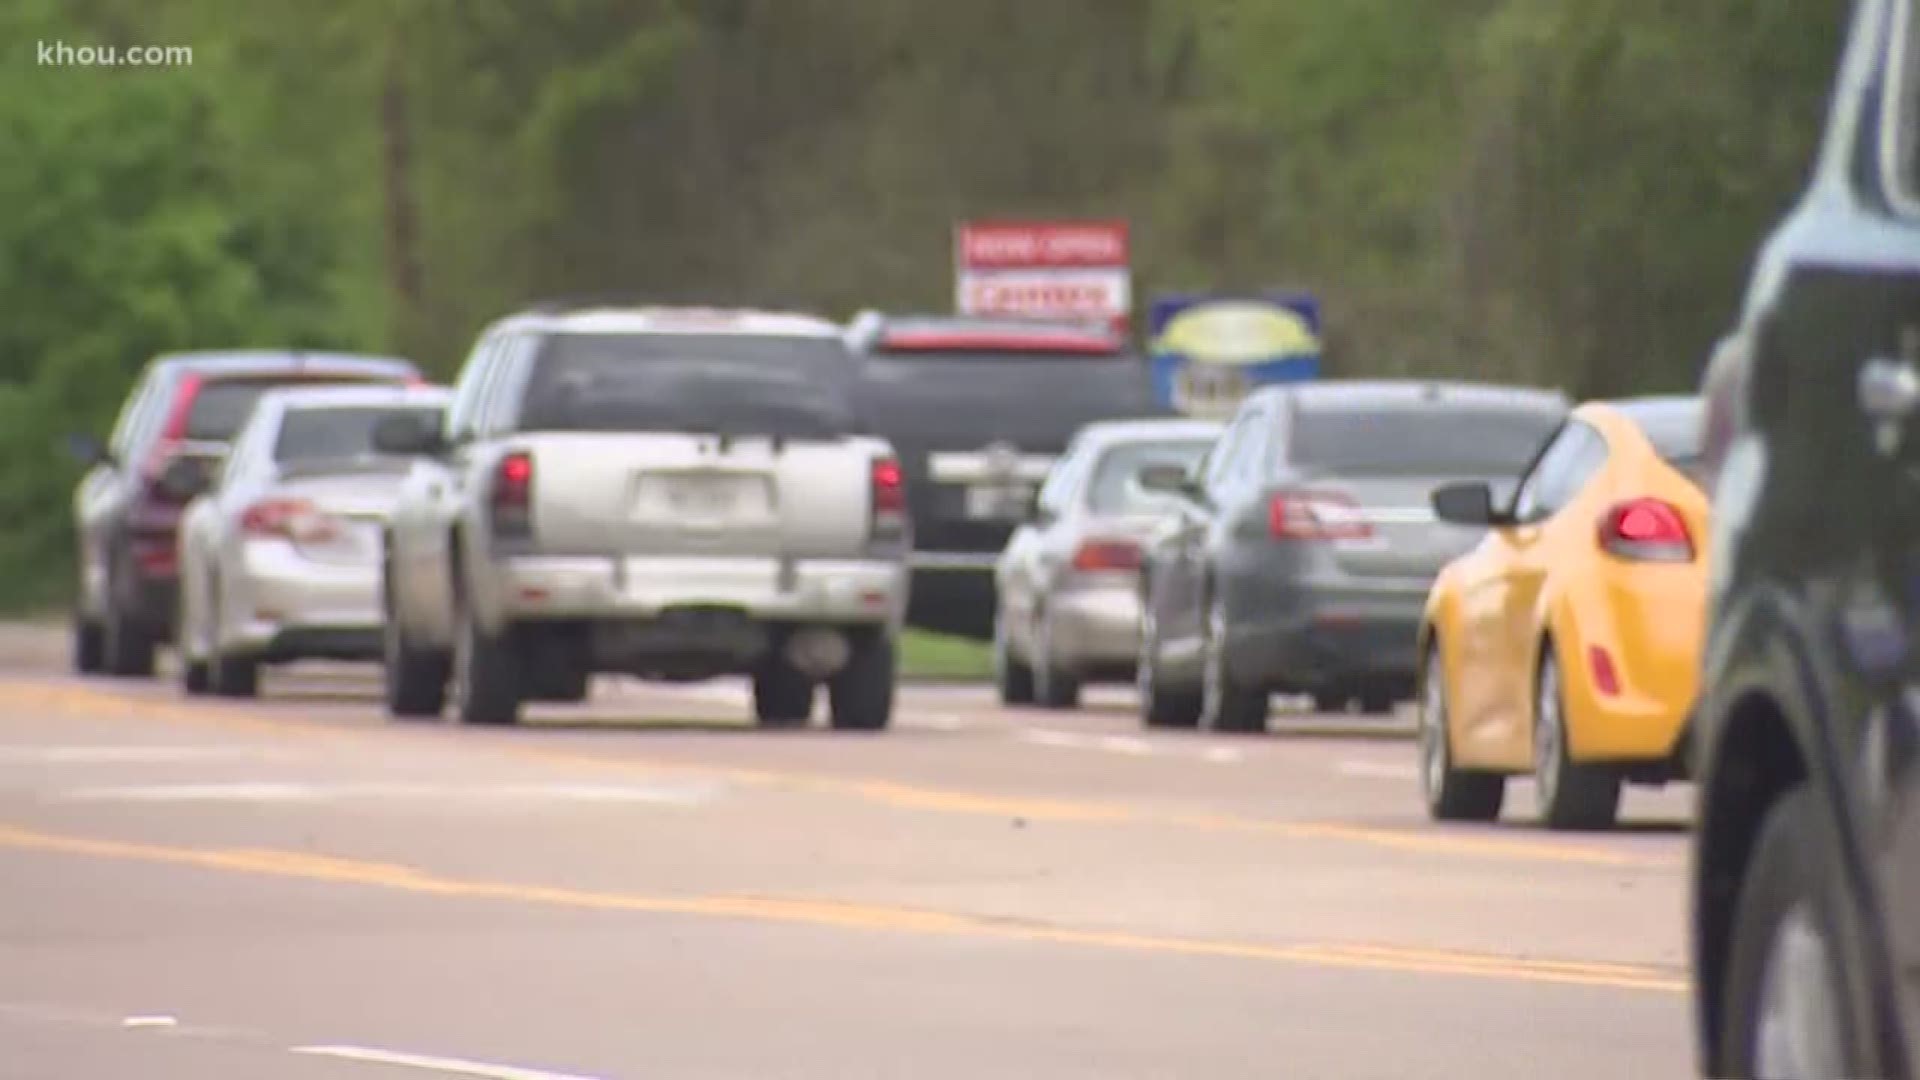 Harris County law enforcement agencies are hoping for more than luck when it comes to keeping drivers safe this St. Patrick's Day weekend.